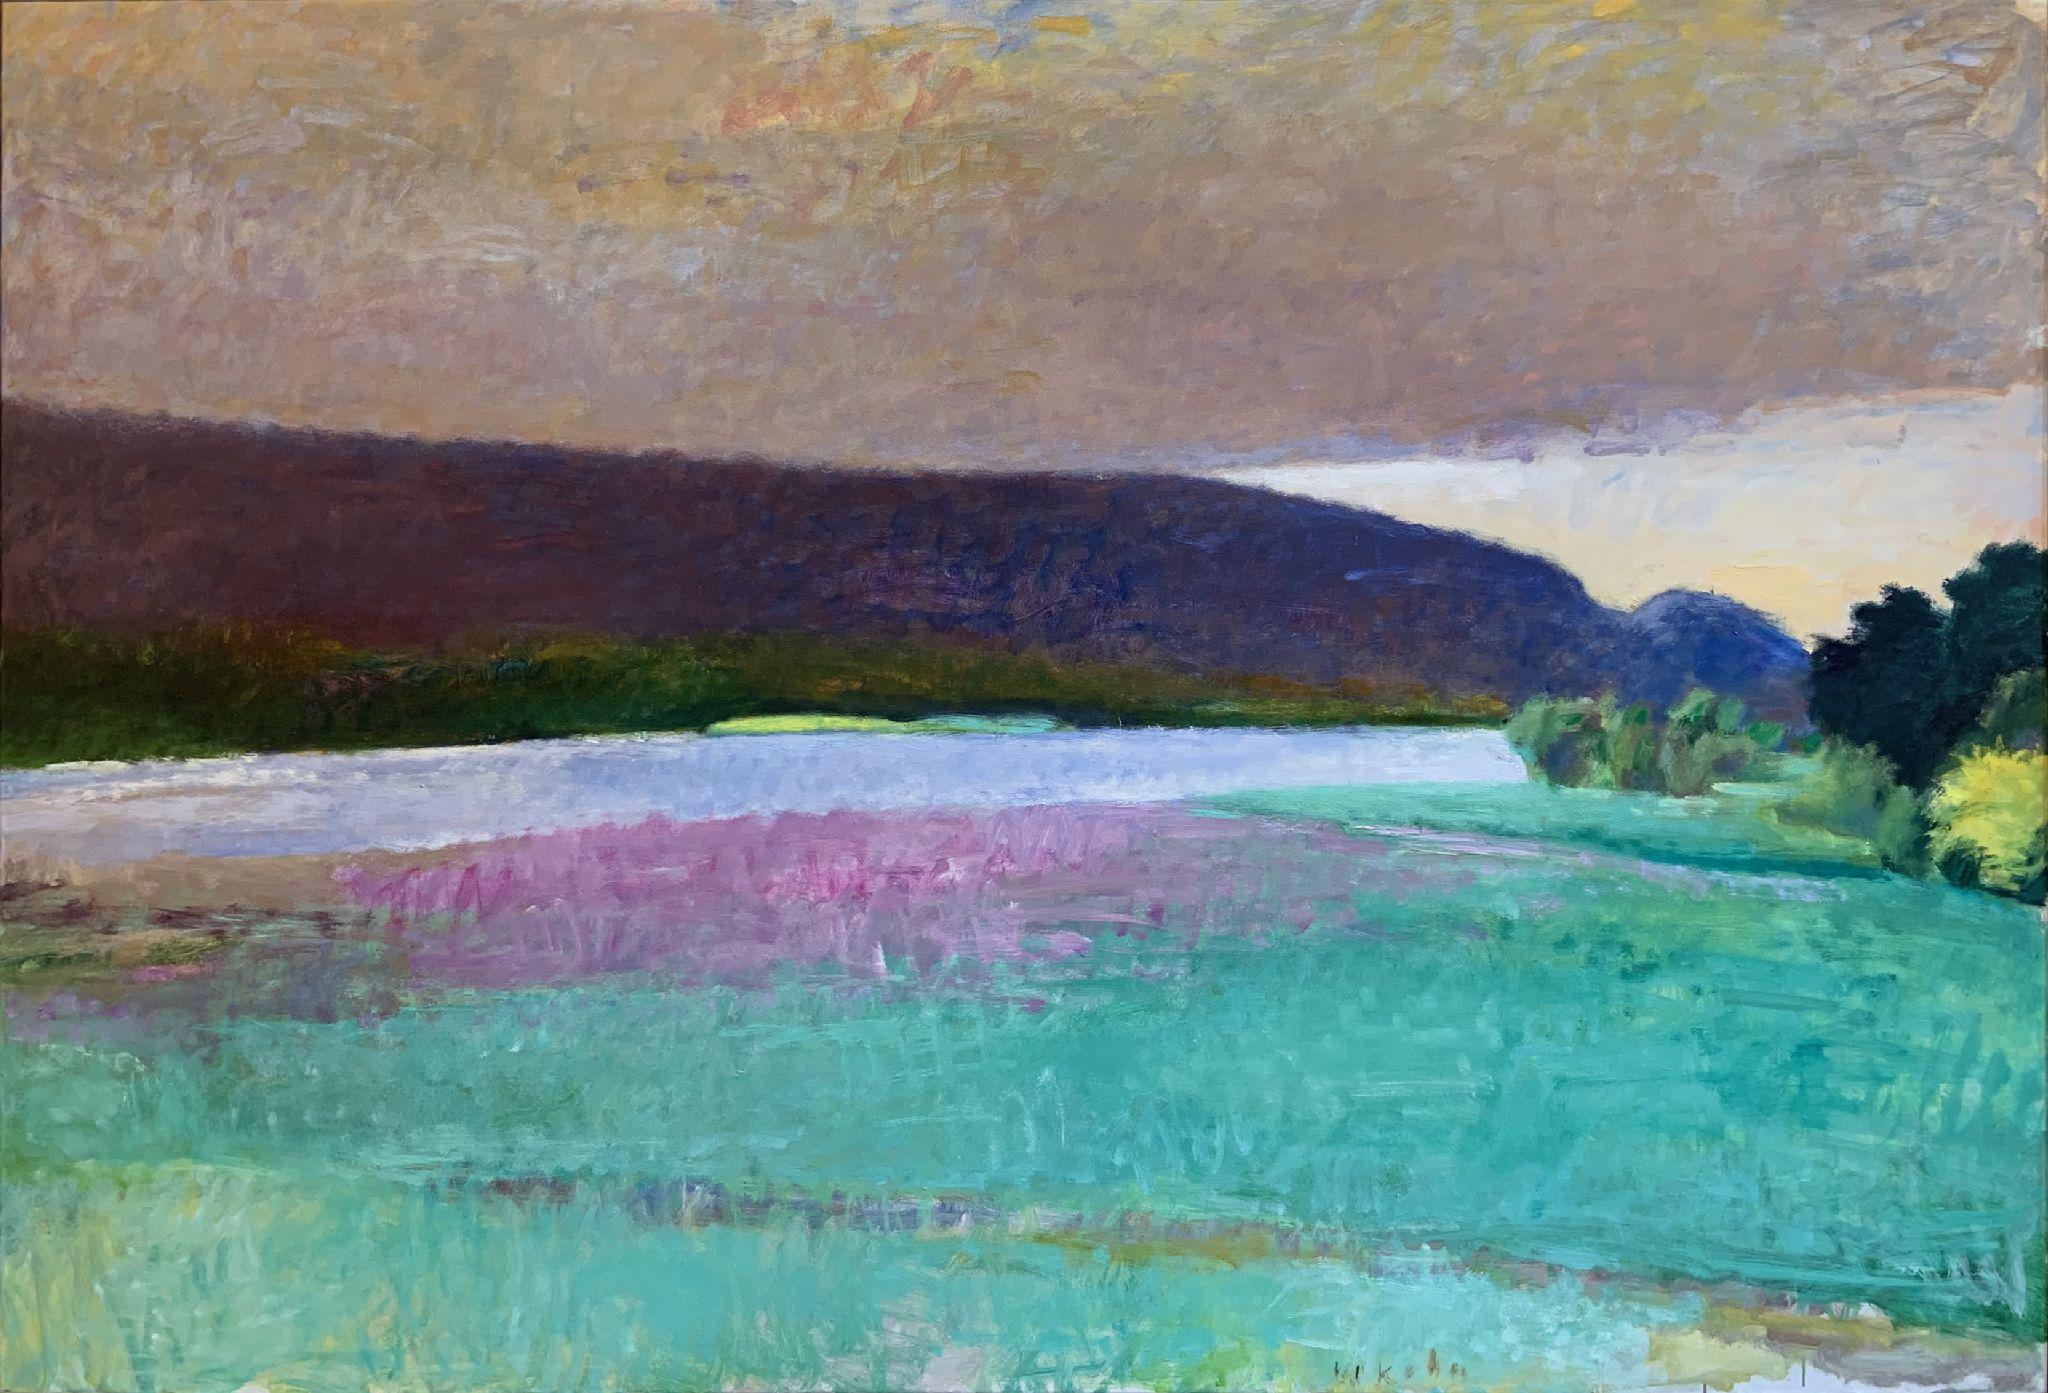 Fog Bank Lifting Over Connecticut River - Painting by Wolf Kahn